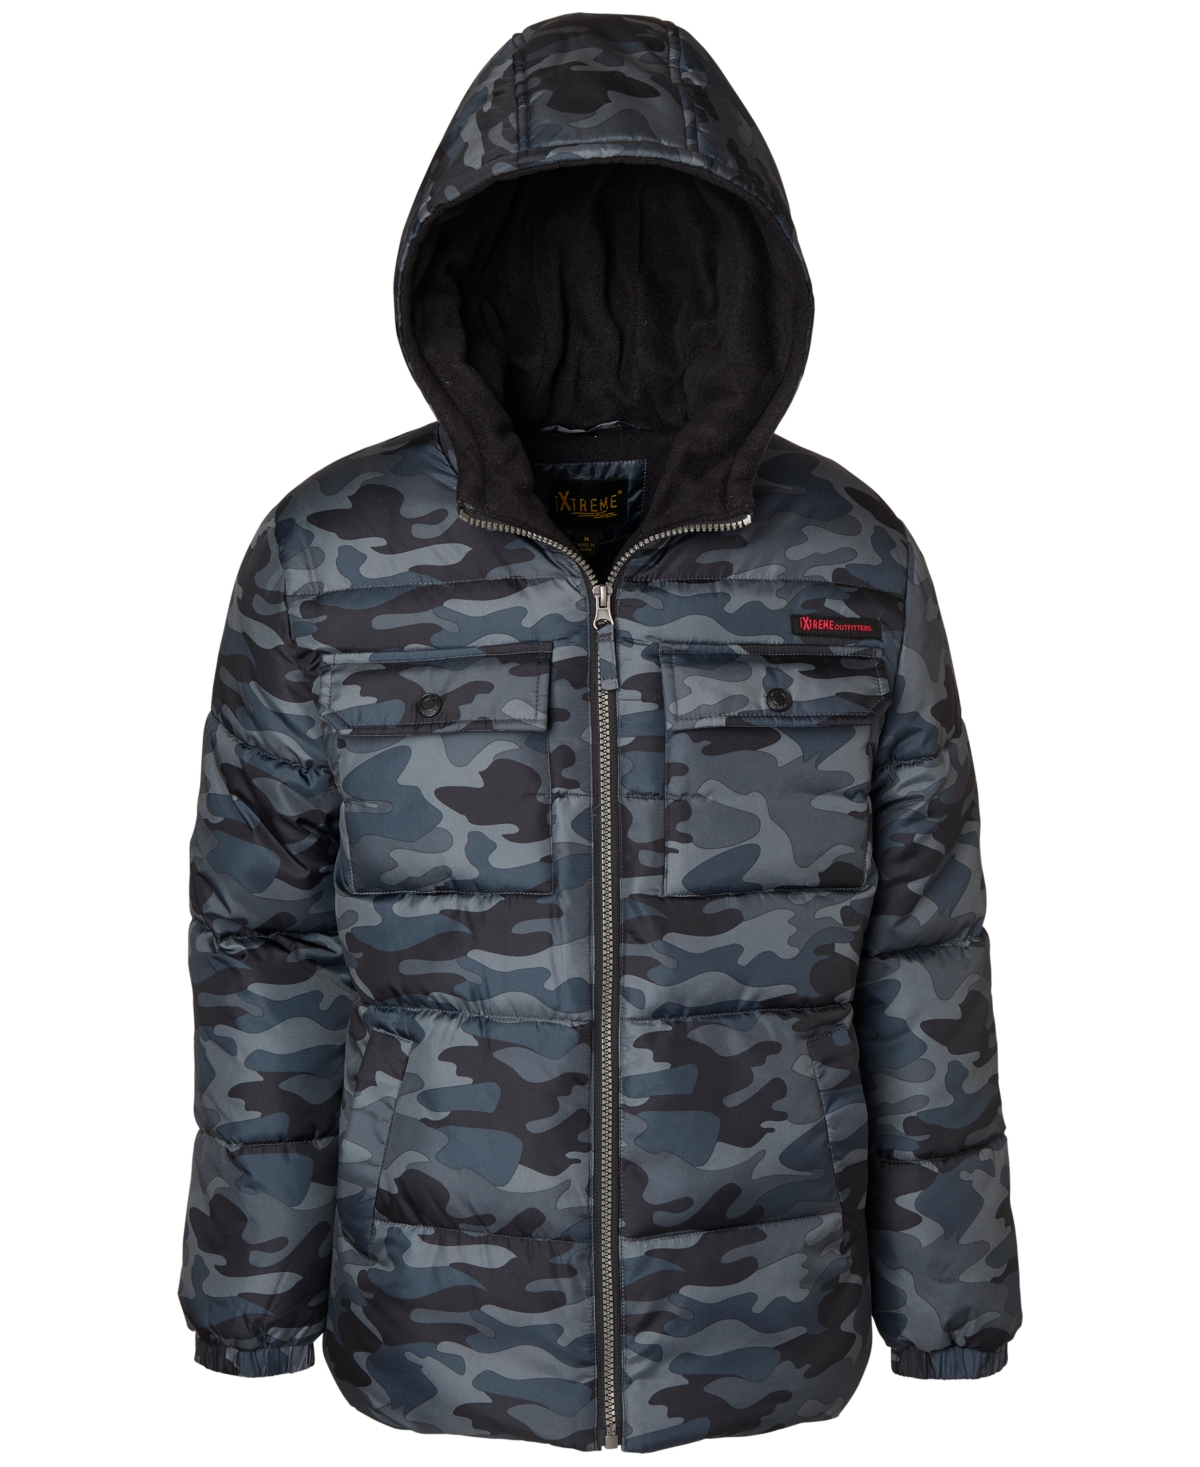 WIPPETTE IXTREME BIG BOYS CAMO-PRINT HOODED PUFFER JACKET